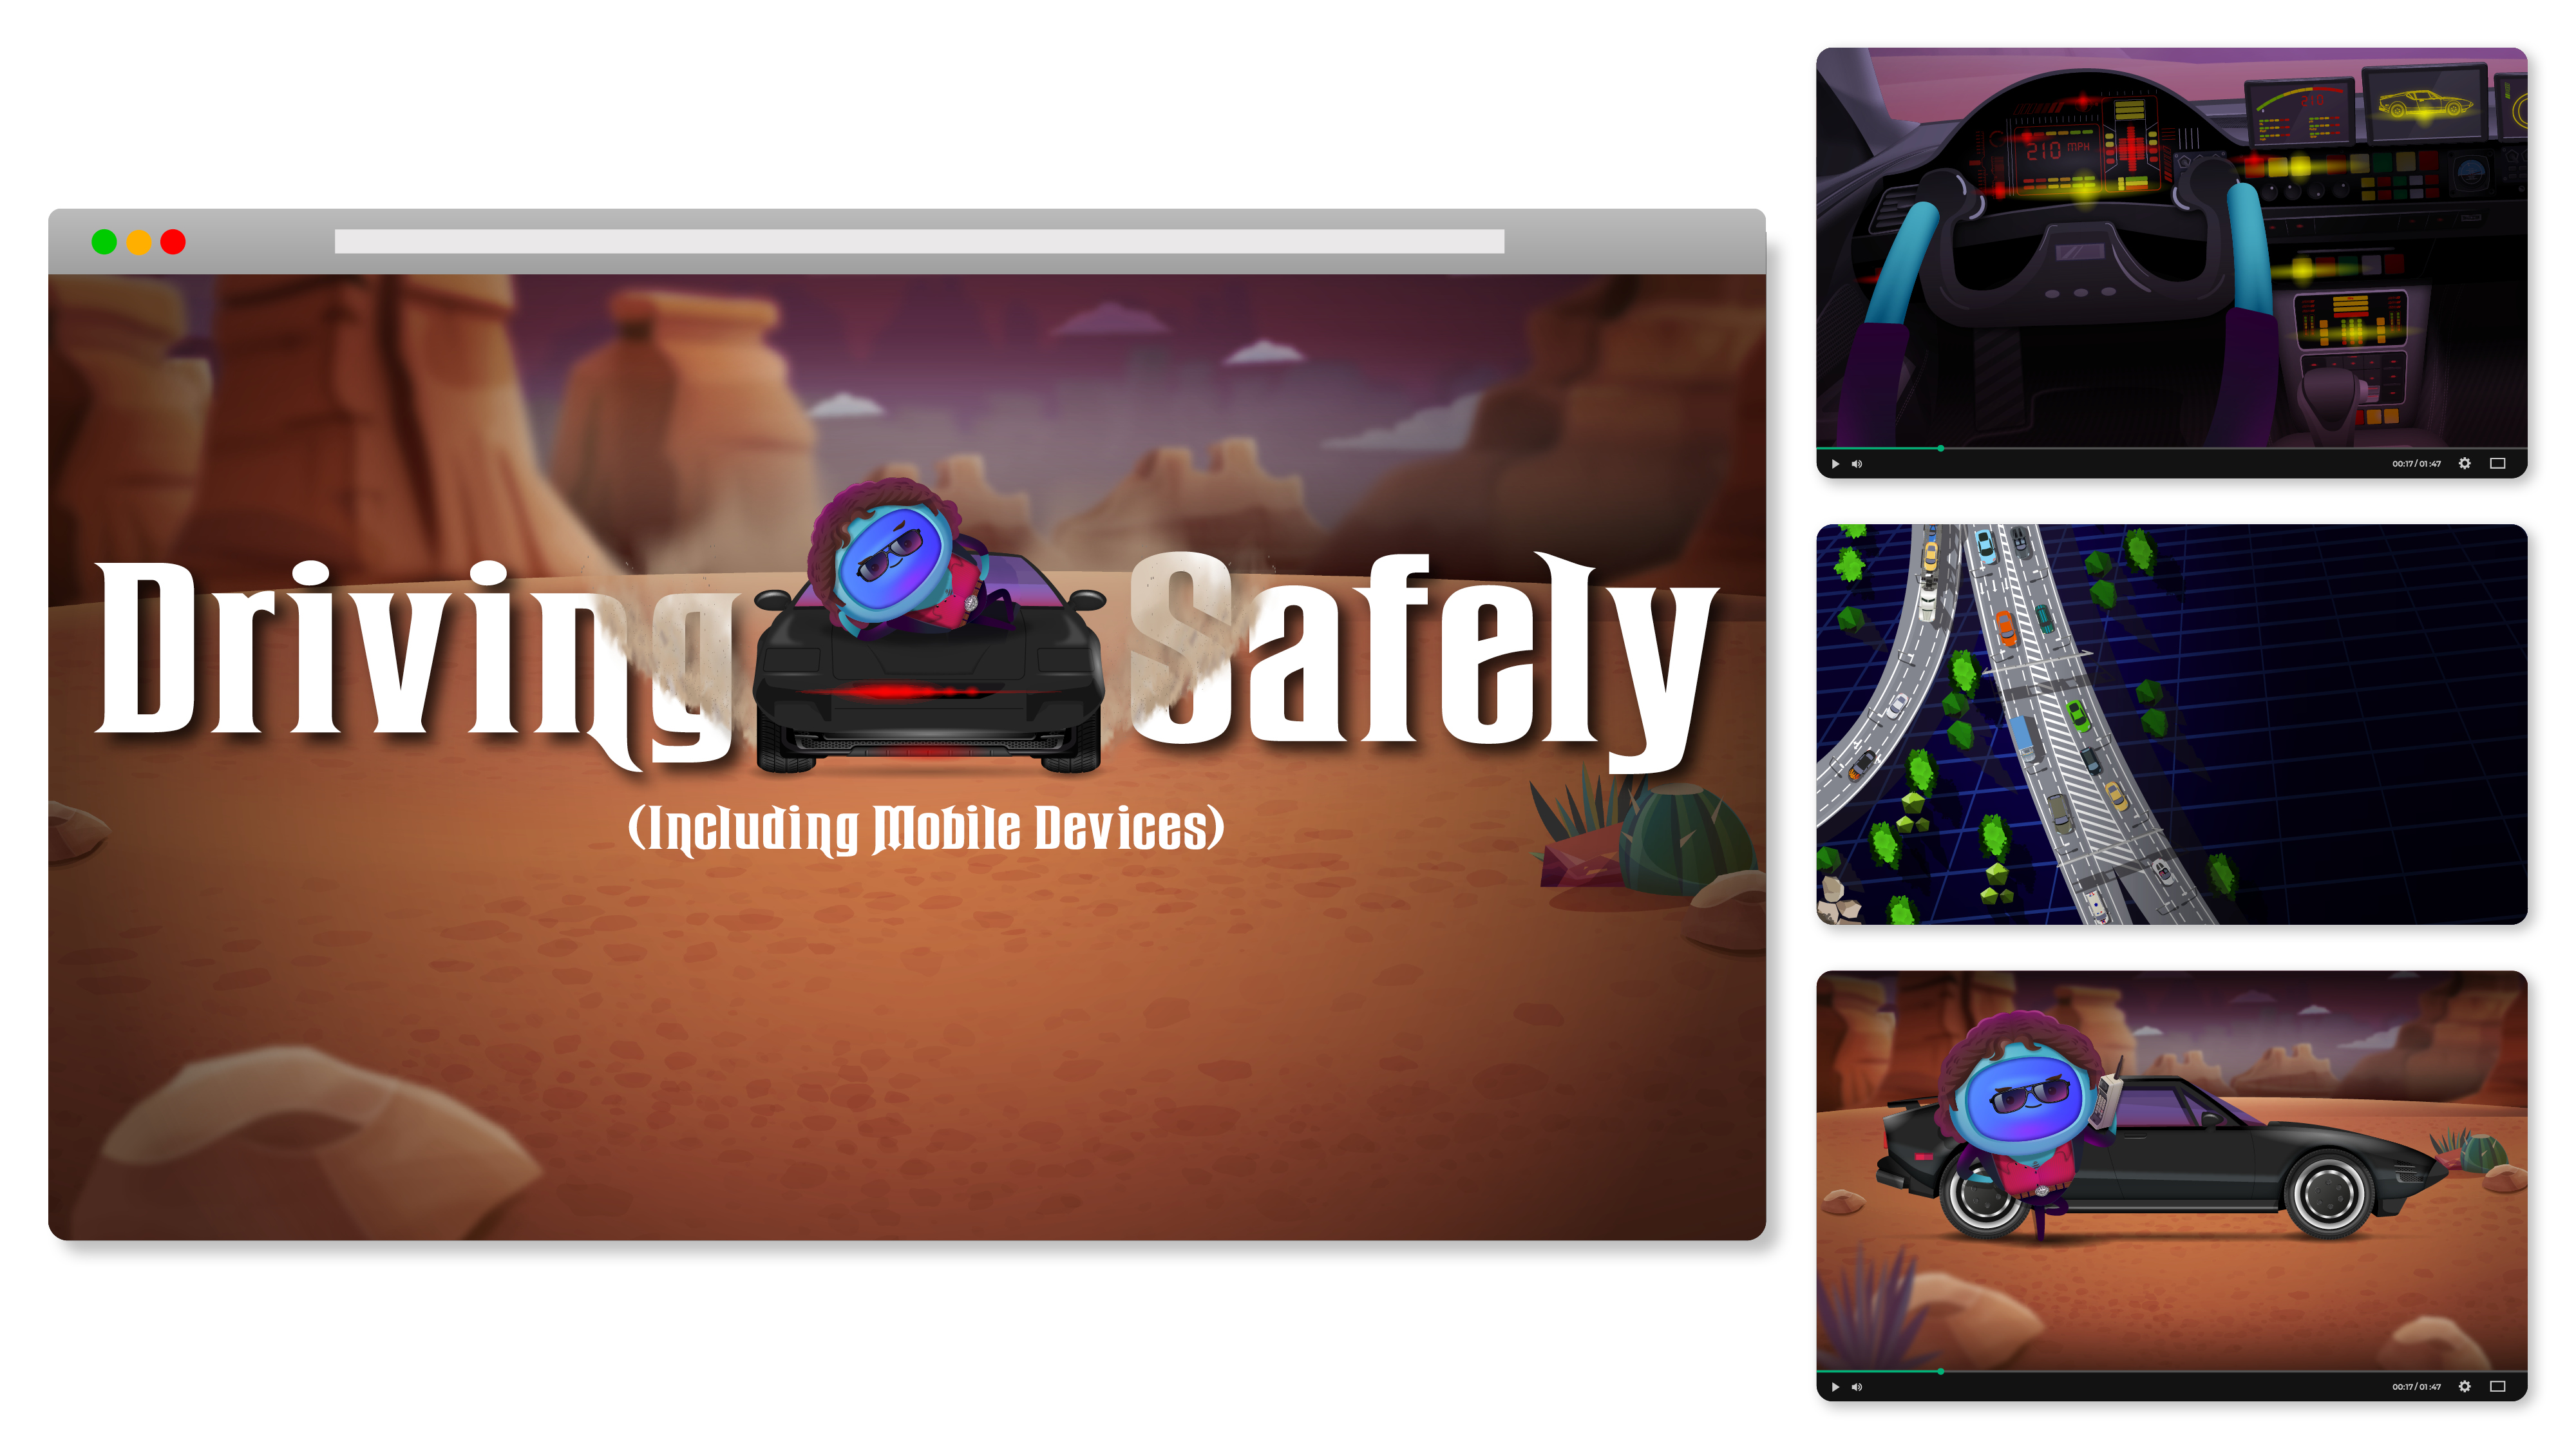 Driving Safely - Landing Page